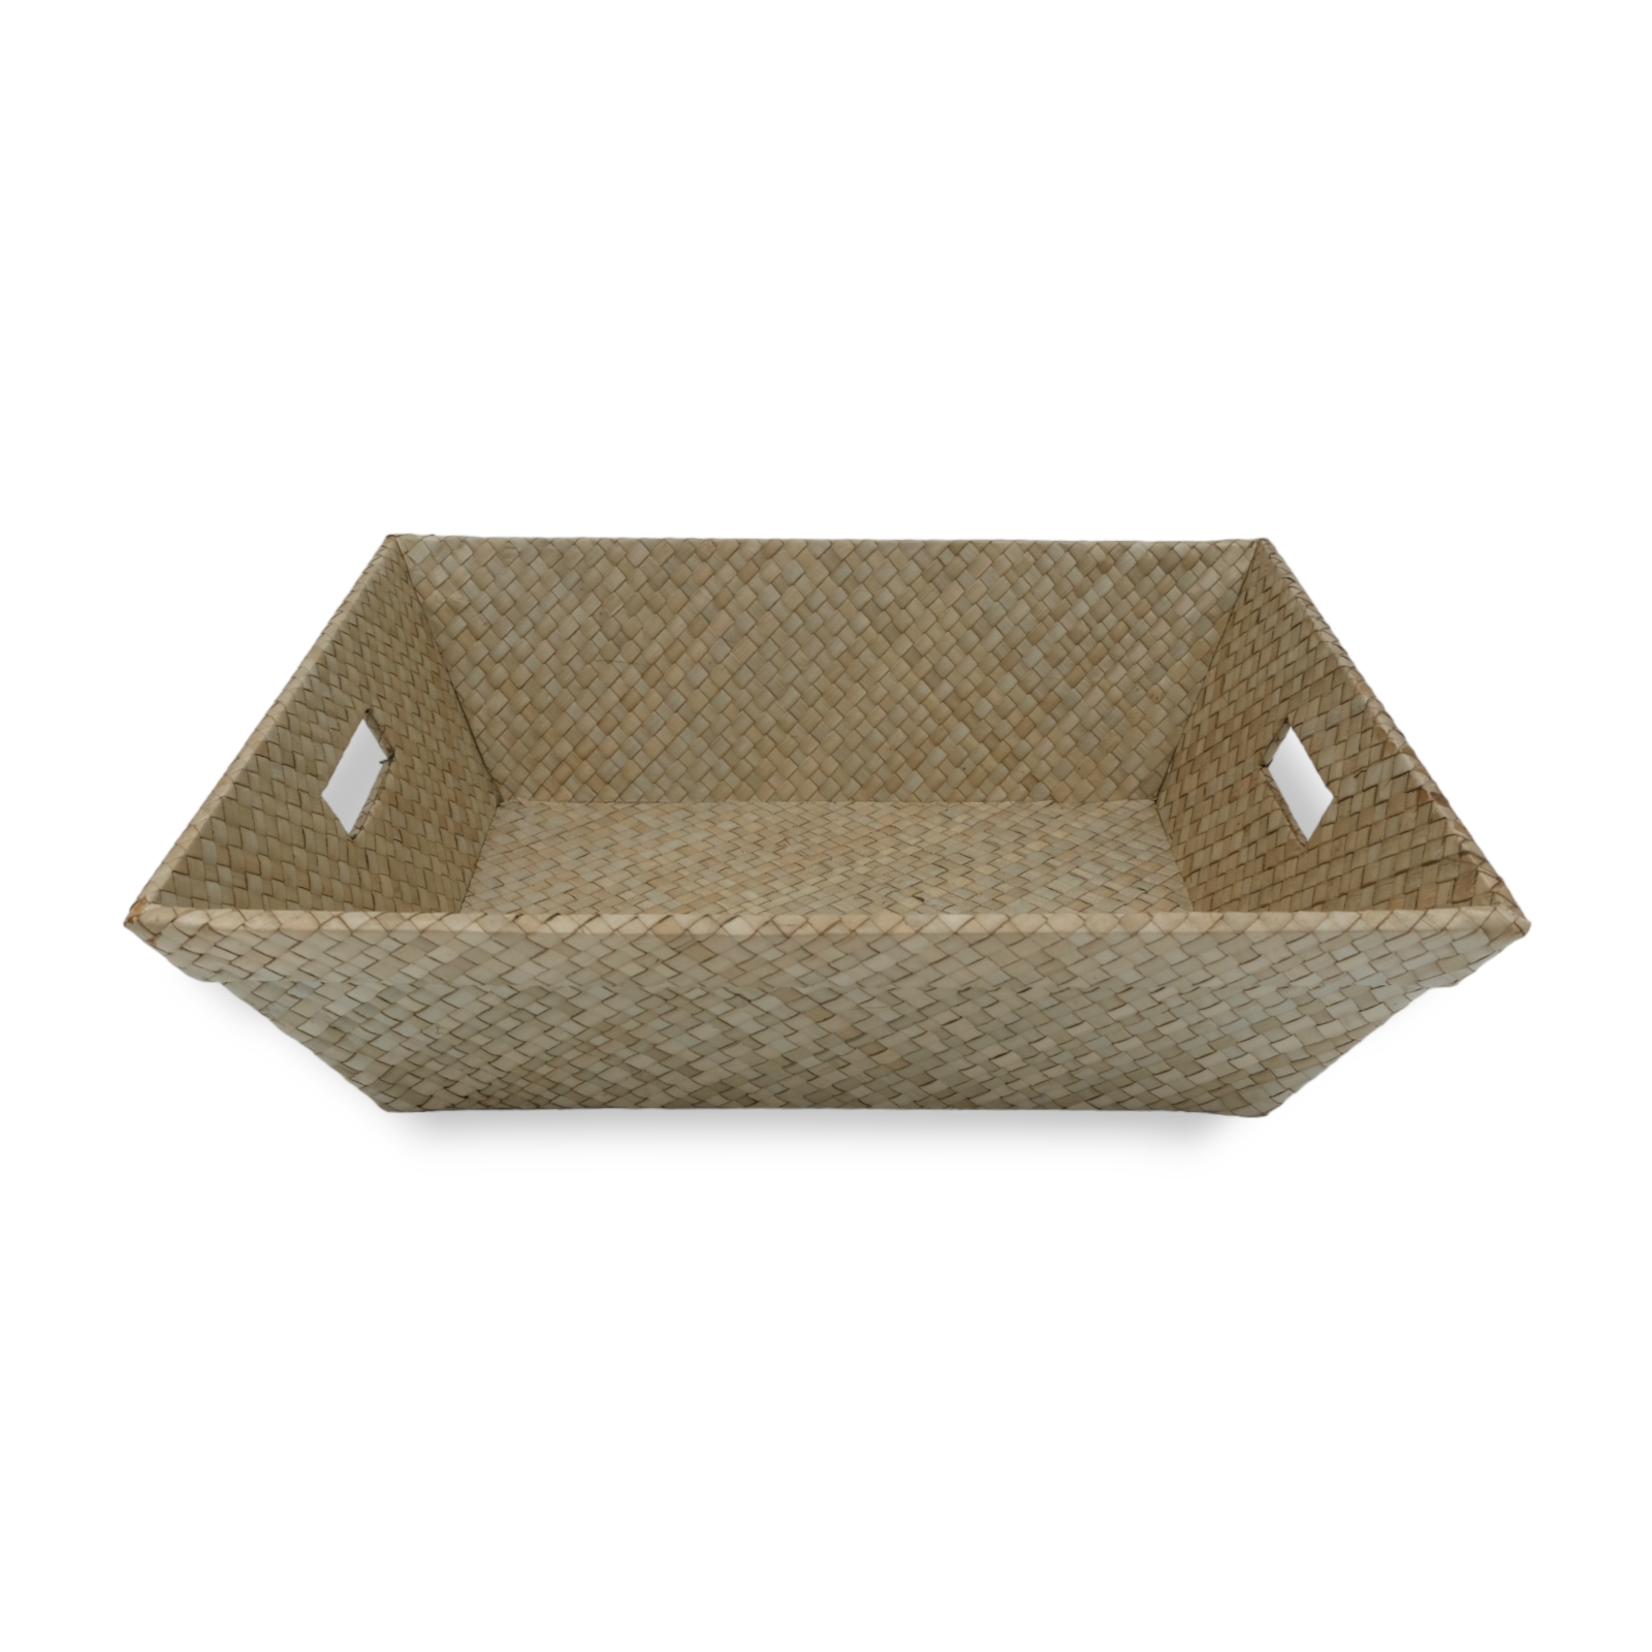 Hand Woven Lauhala Box With Handles